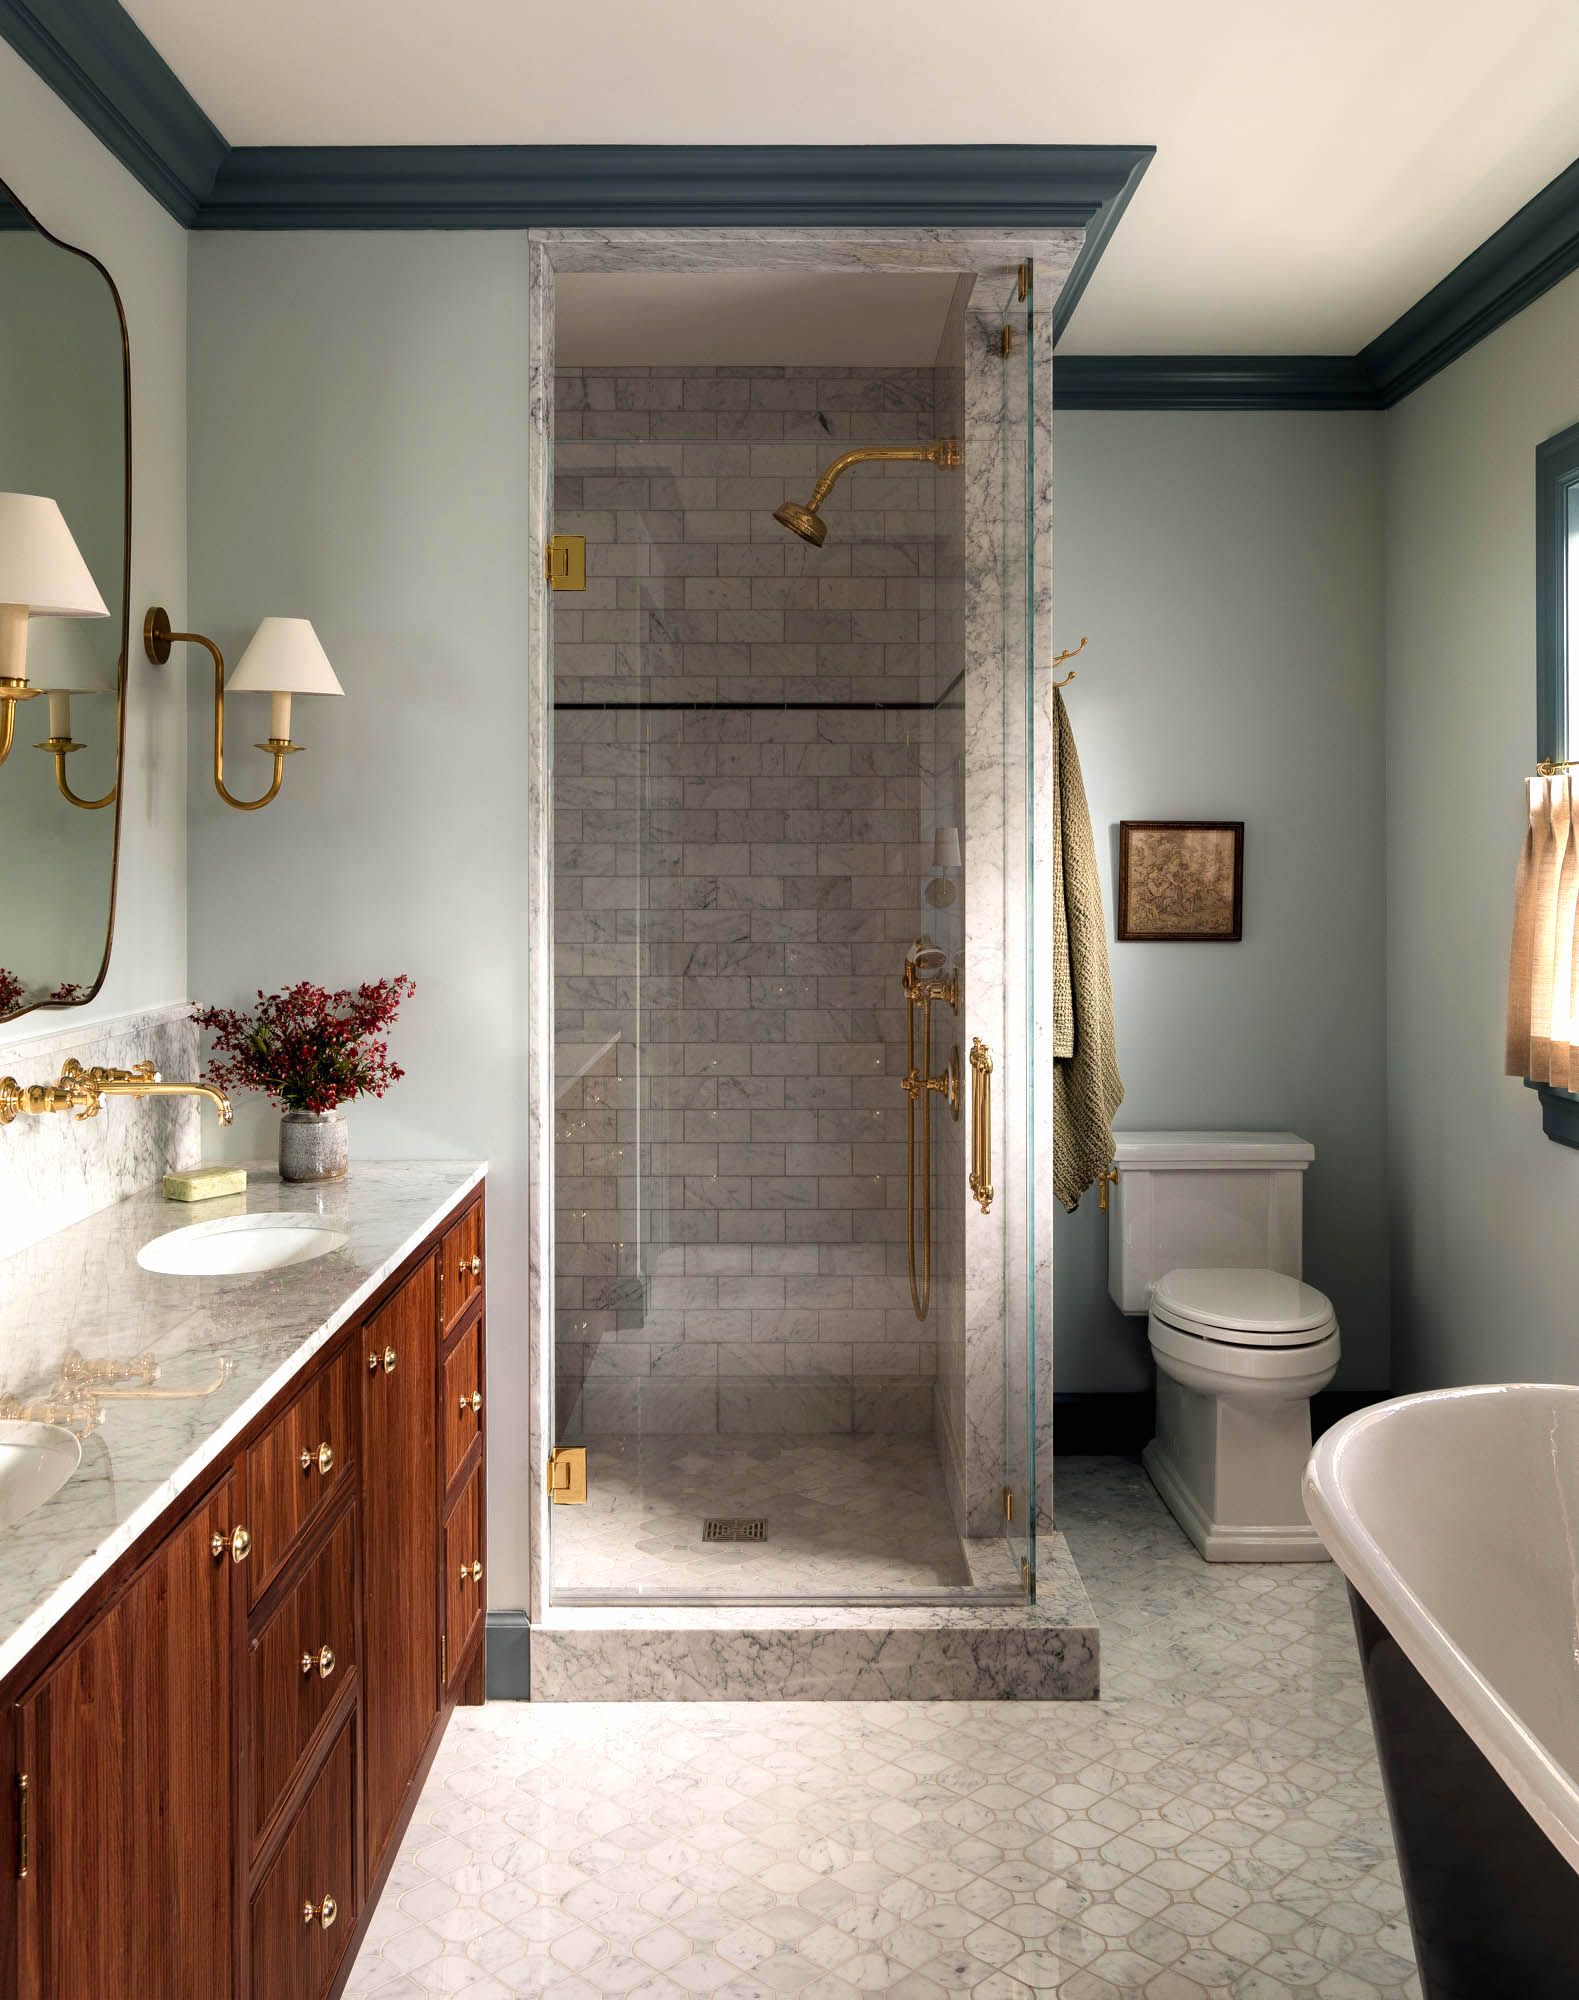 Add that extra touch of elegance to your guest bathroom with